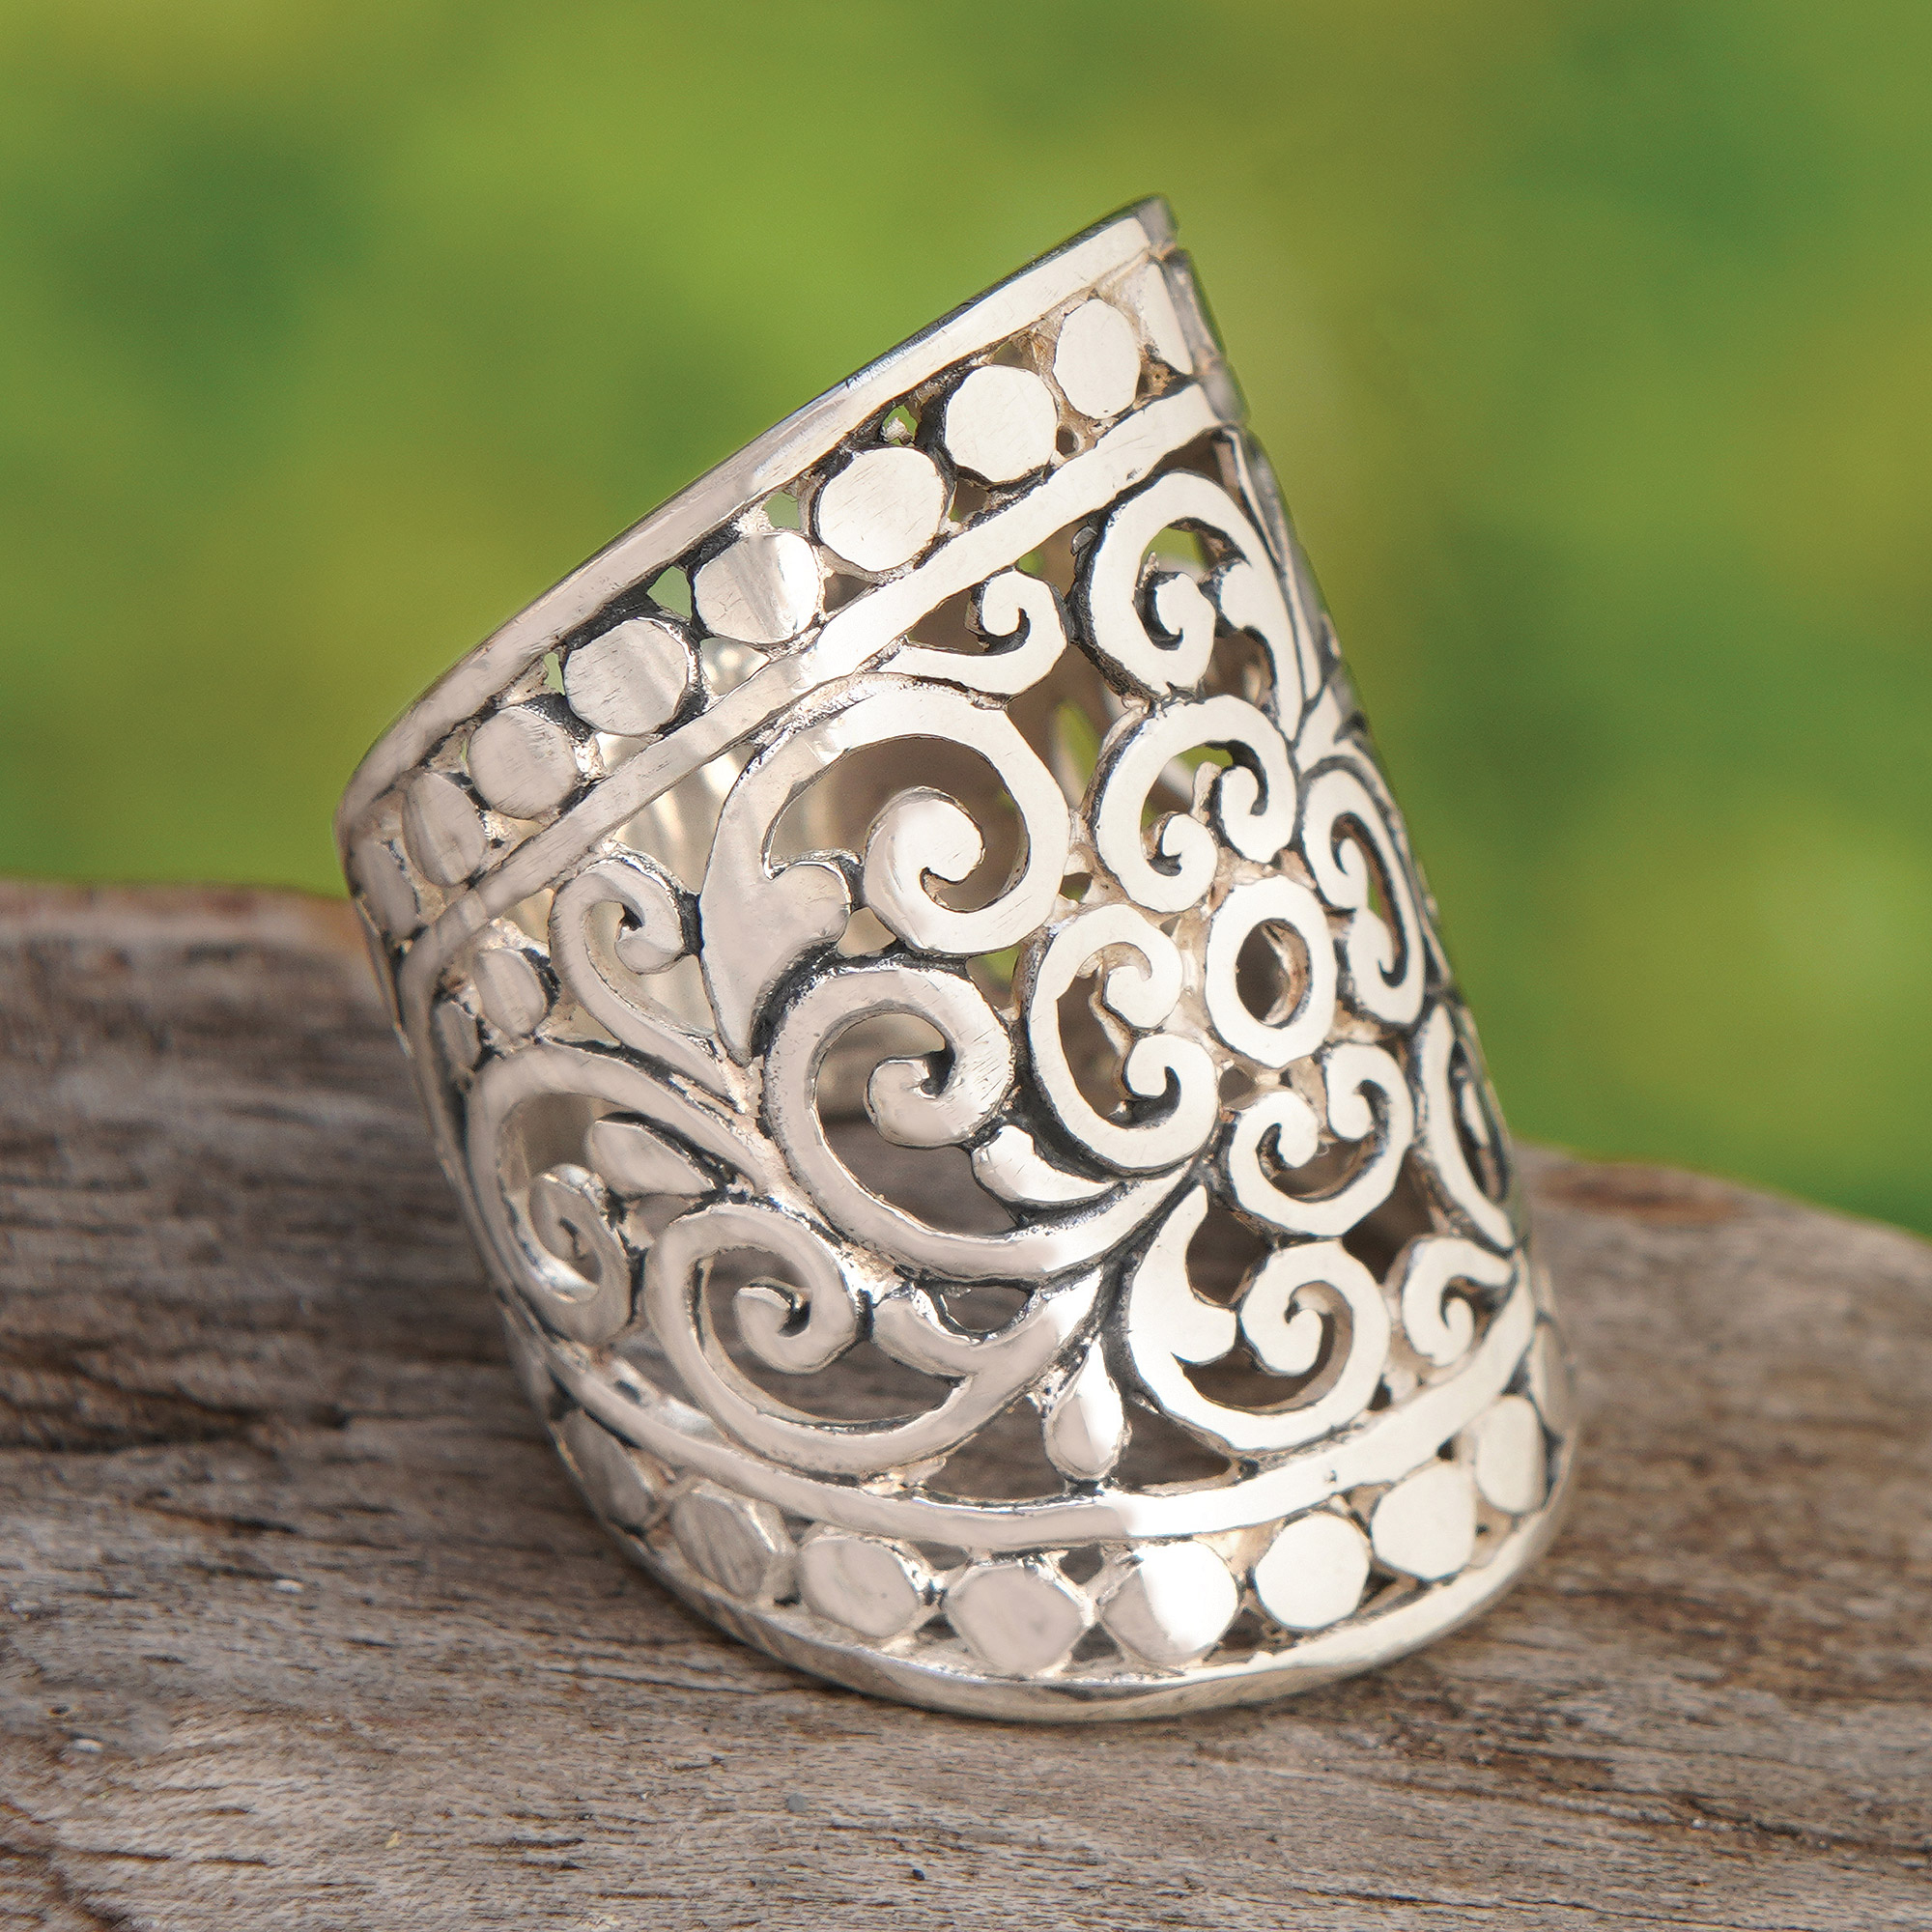 Handcrafted sterling silver jewelry